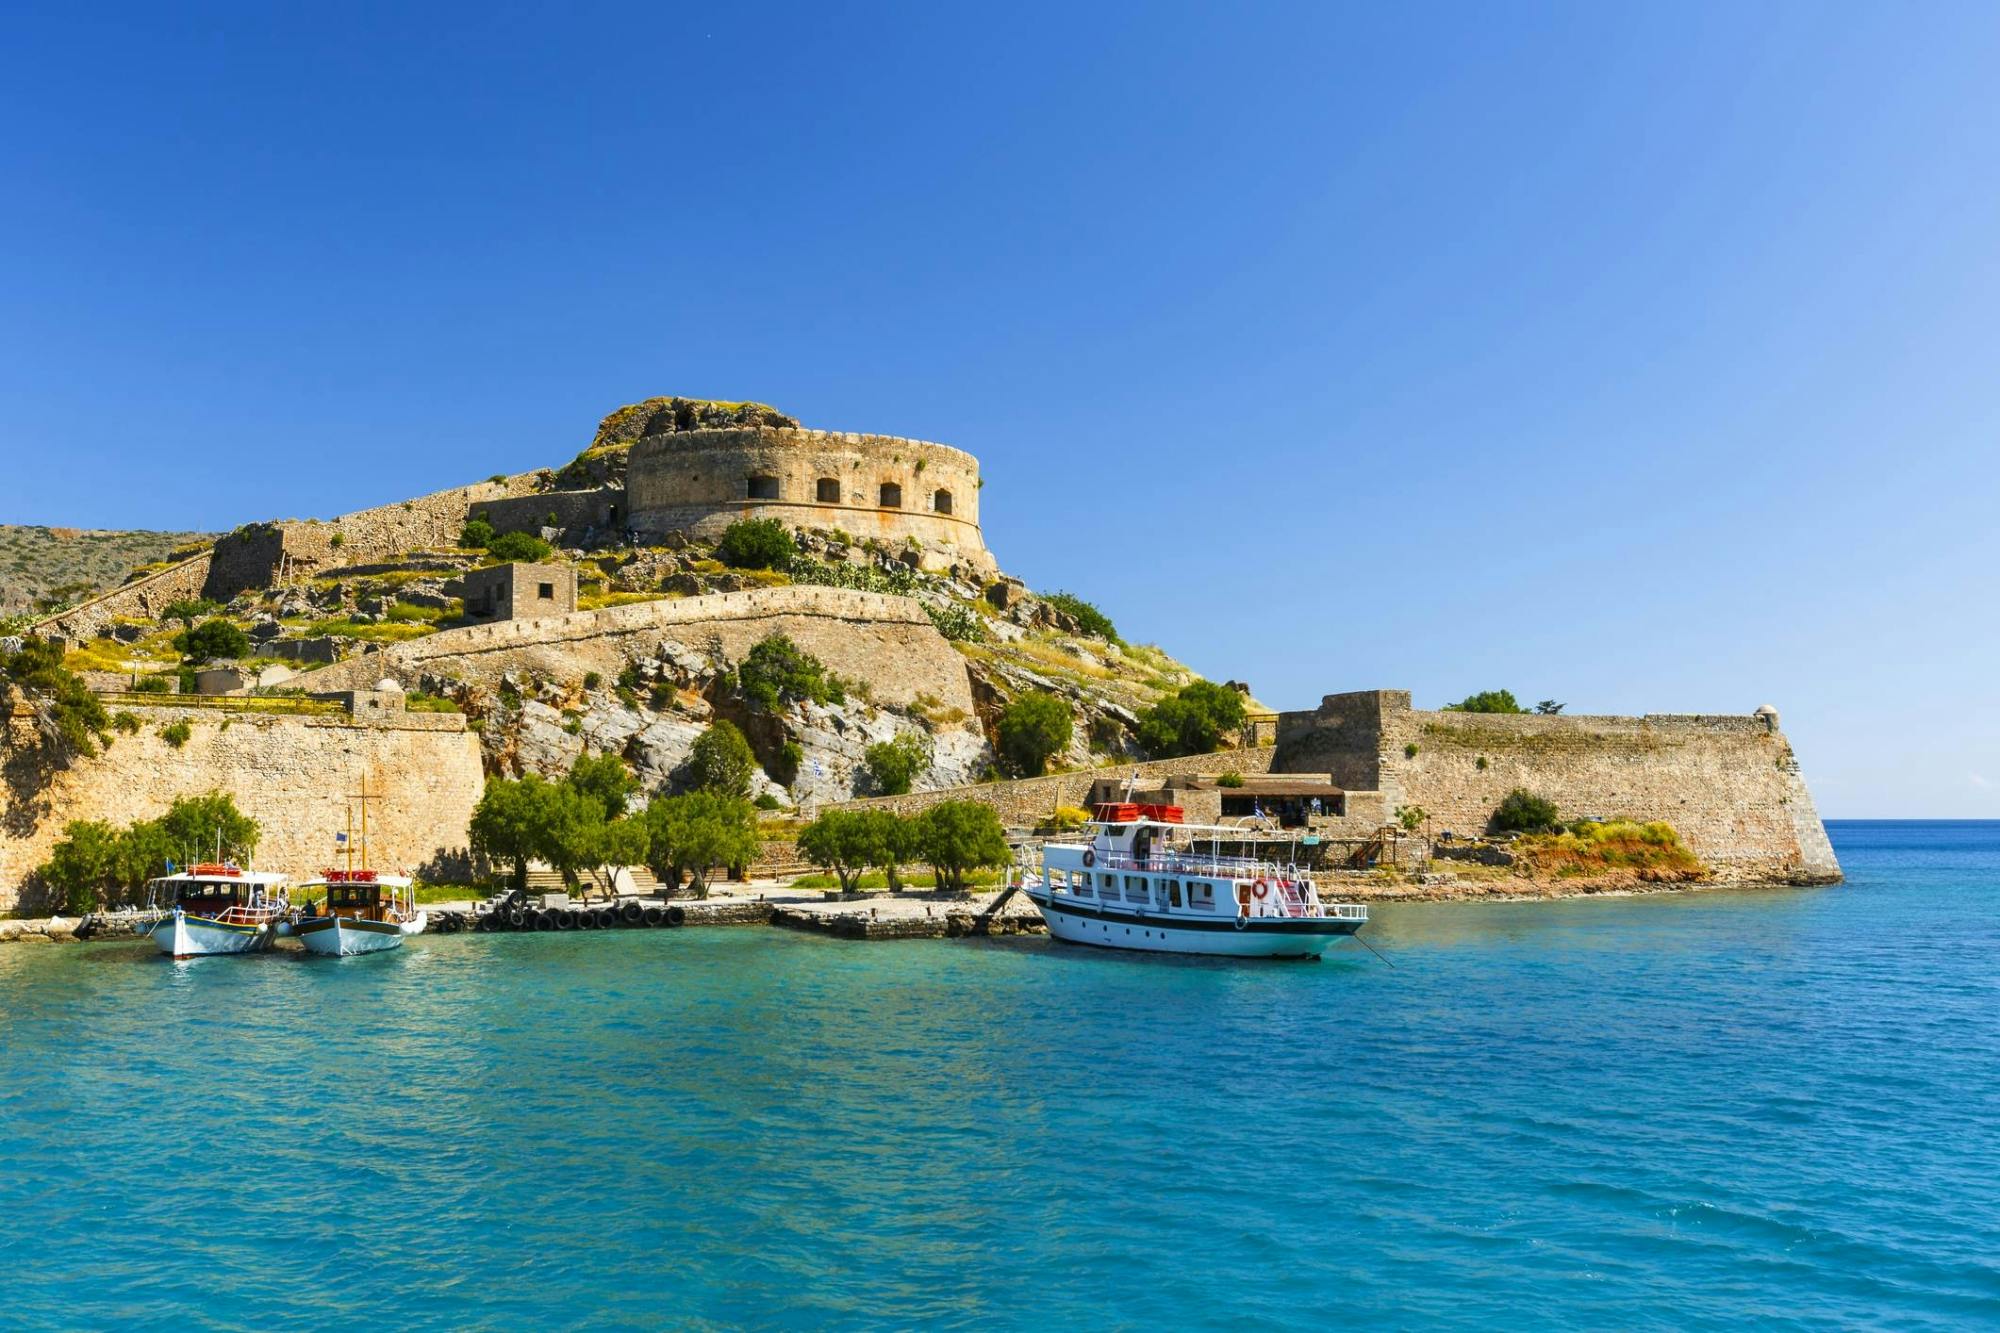 Spinalonga self guided audio tour on your phone Musement